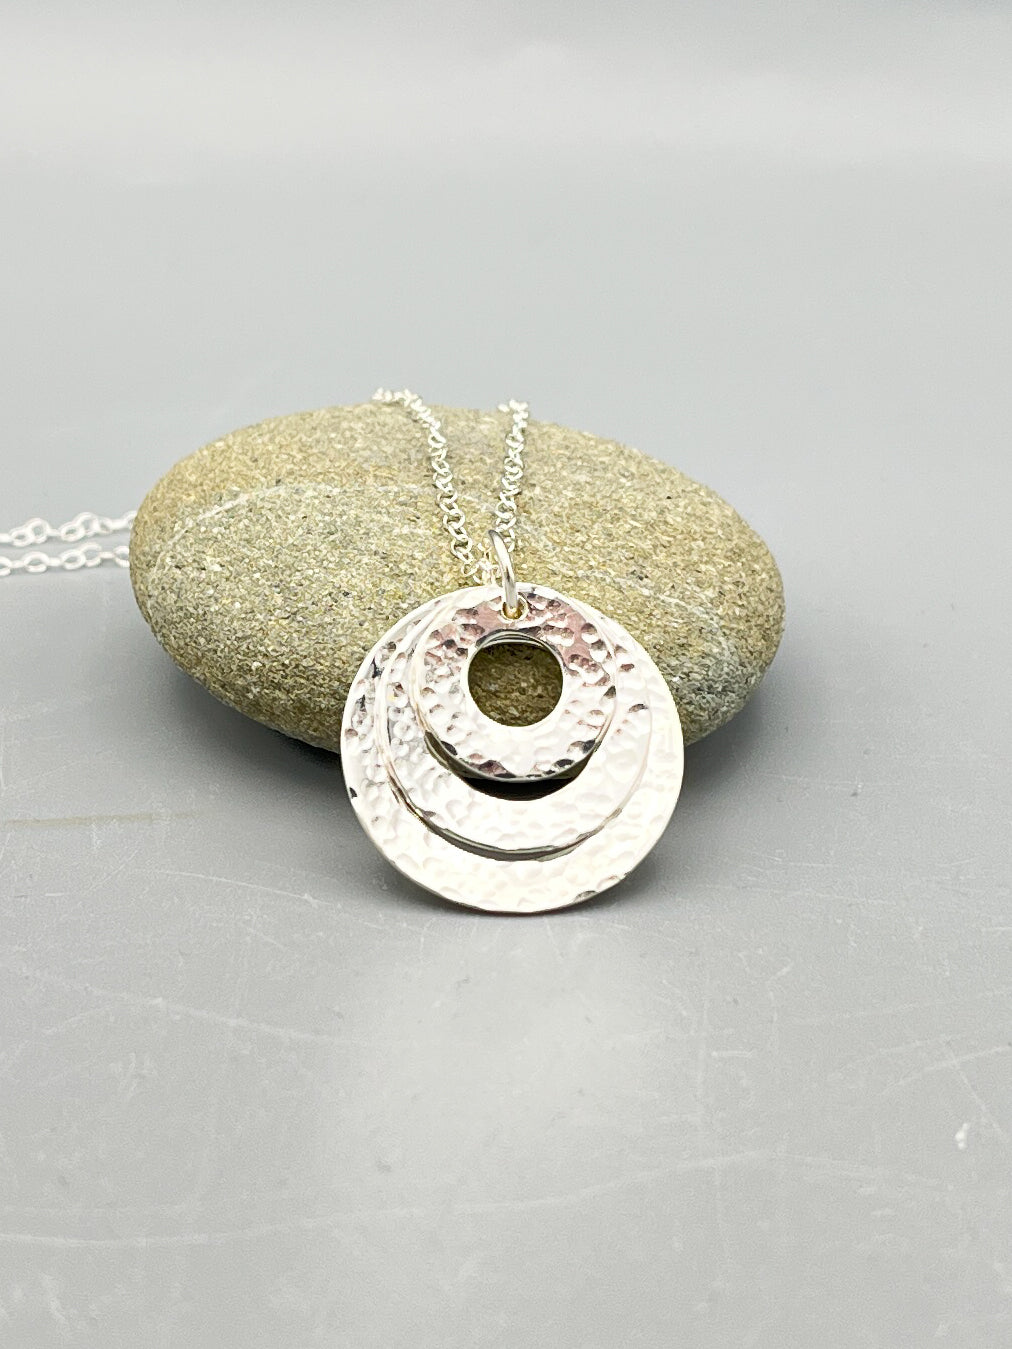 Sterling Silver triple washer design hammered pendant on a 16" chain